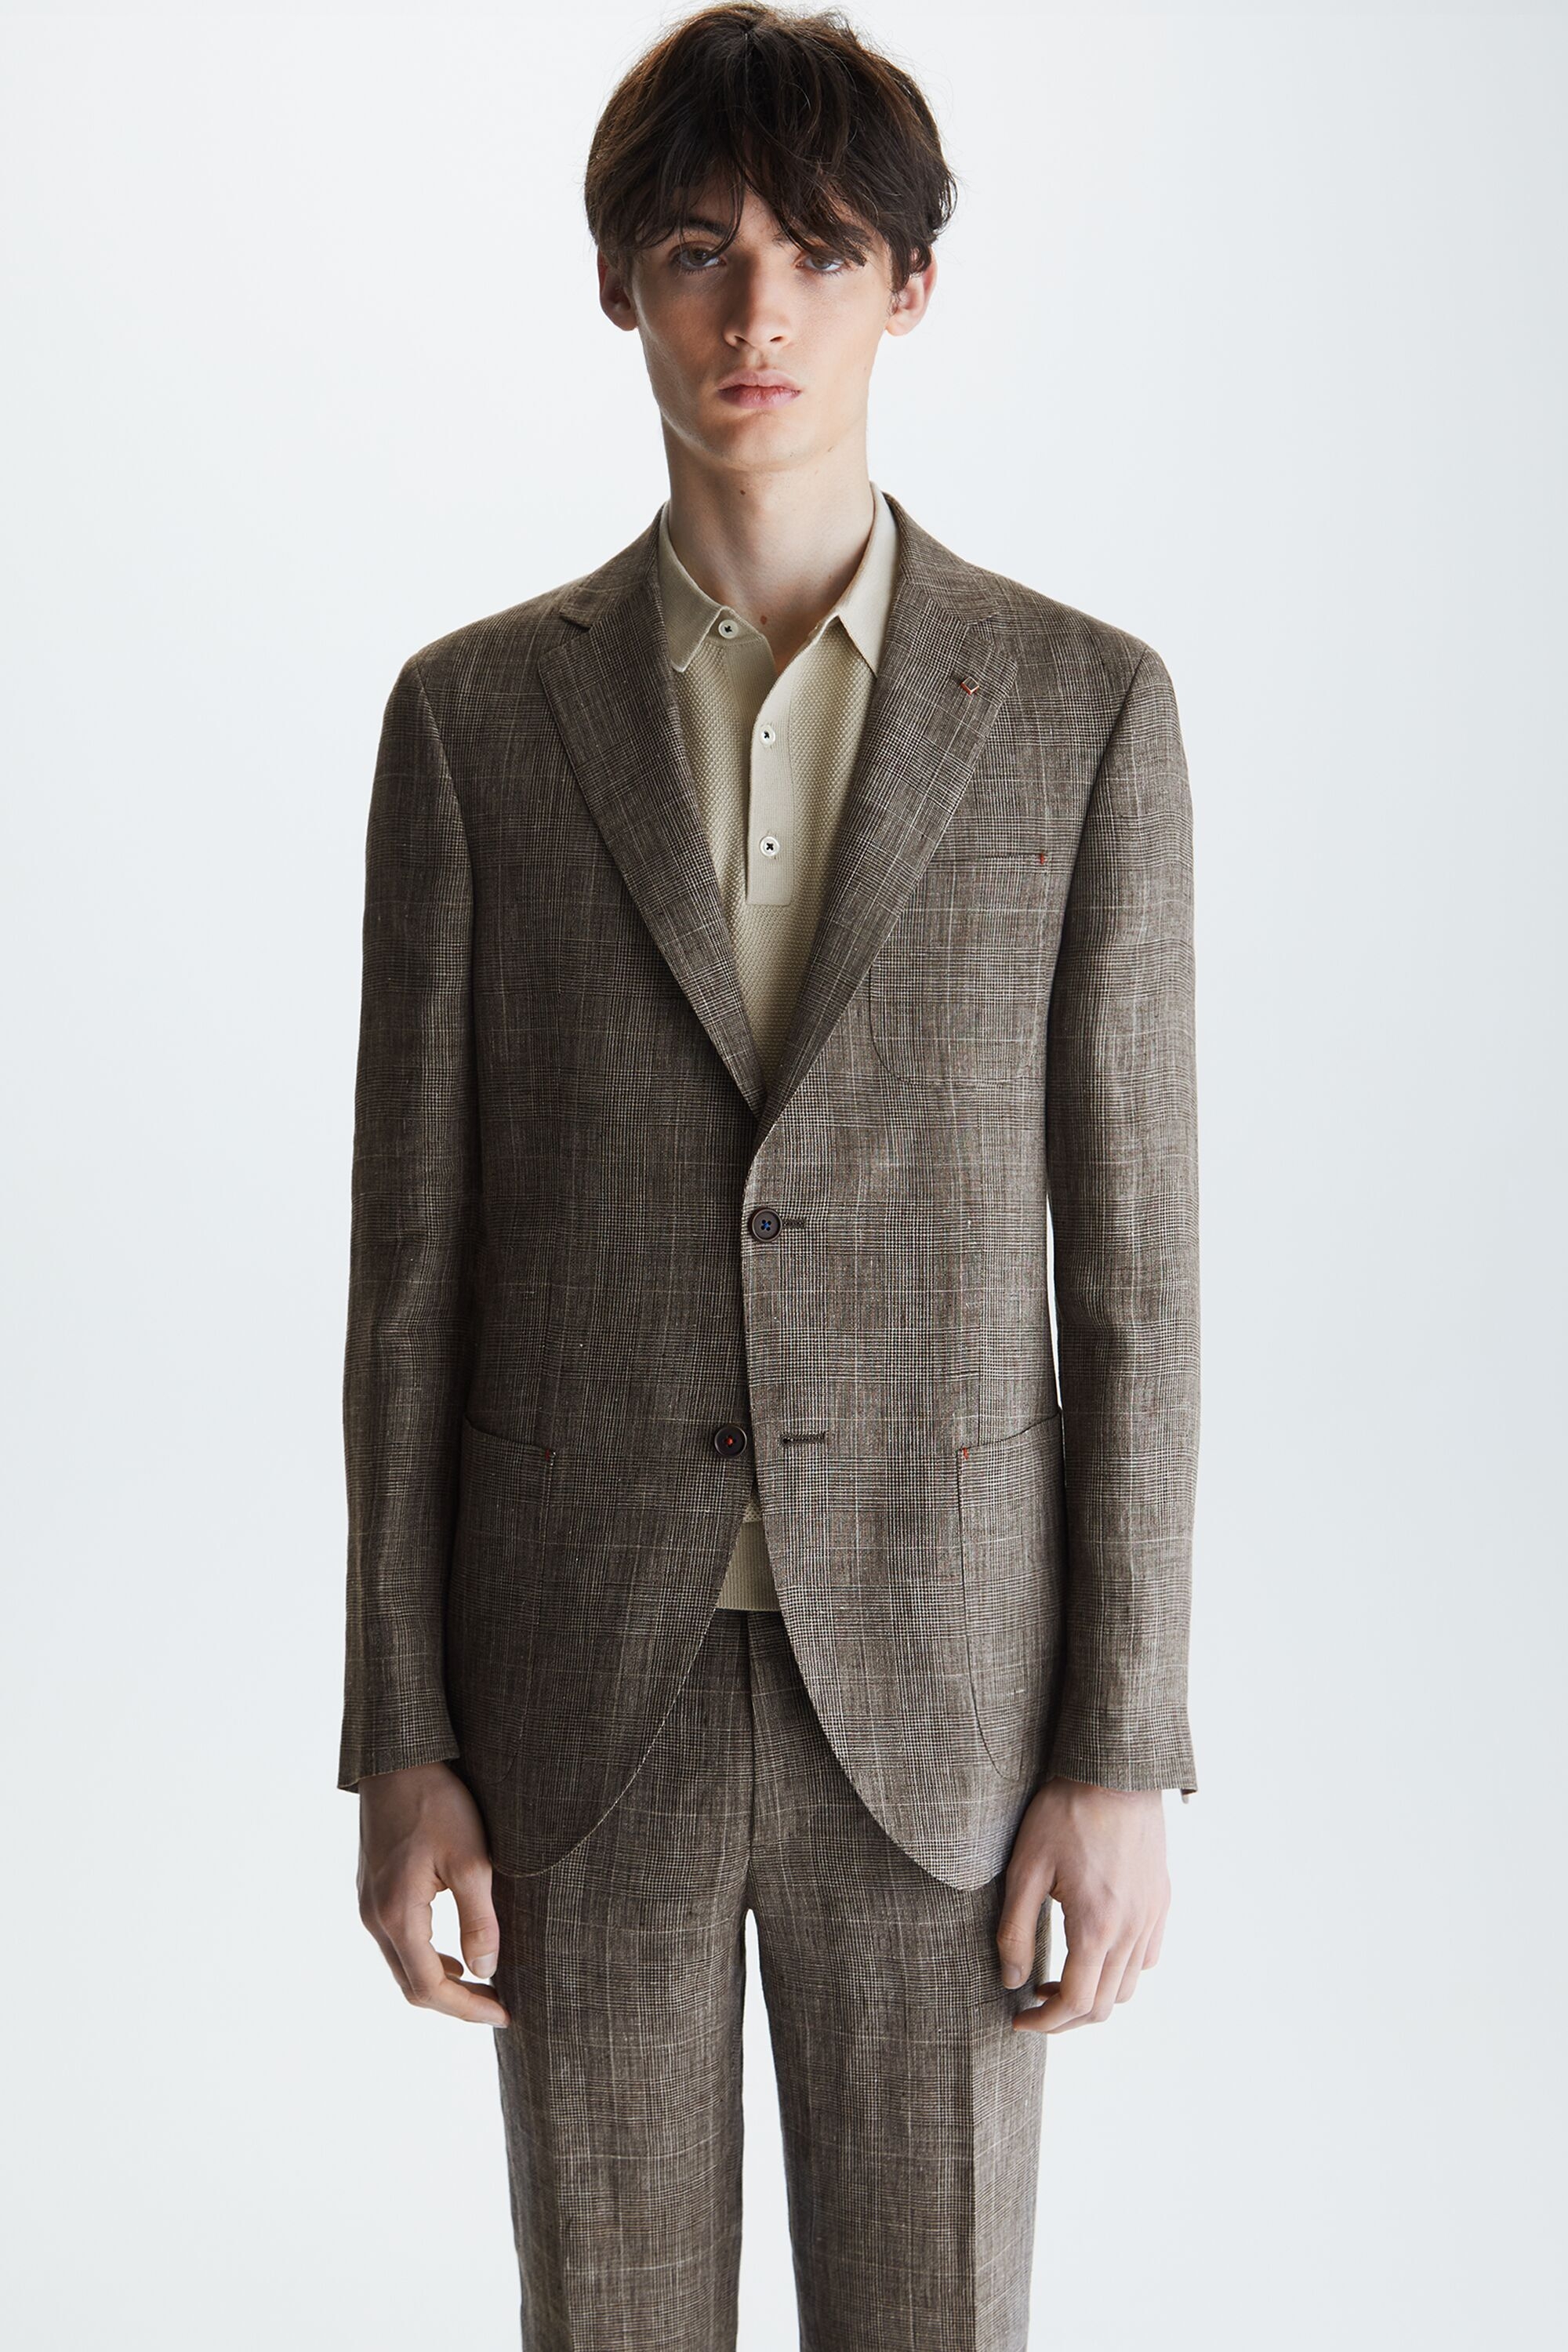 PRINCE OF WALES LINEN RELAXED FIT SUIT JACKET